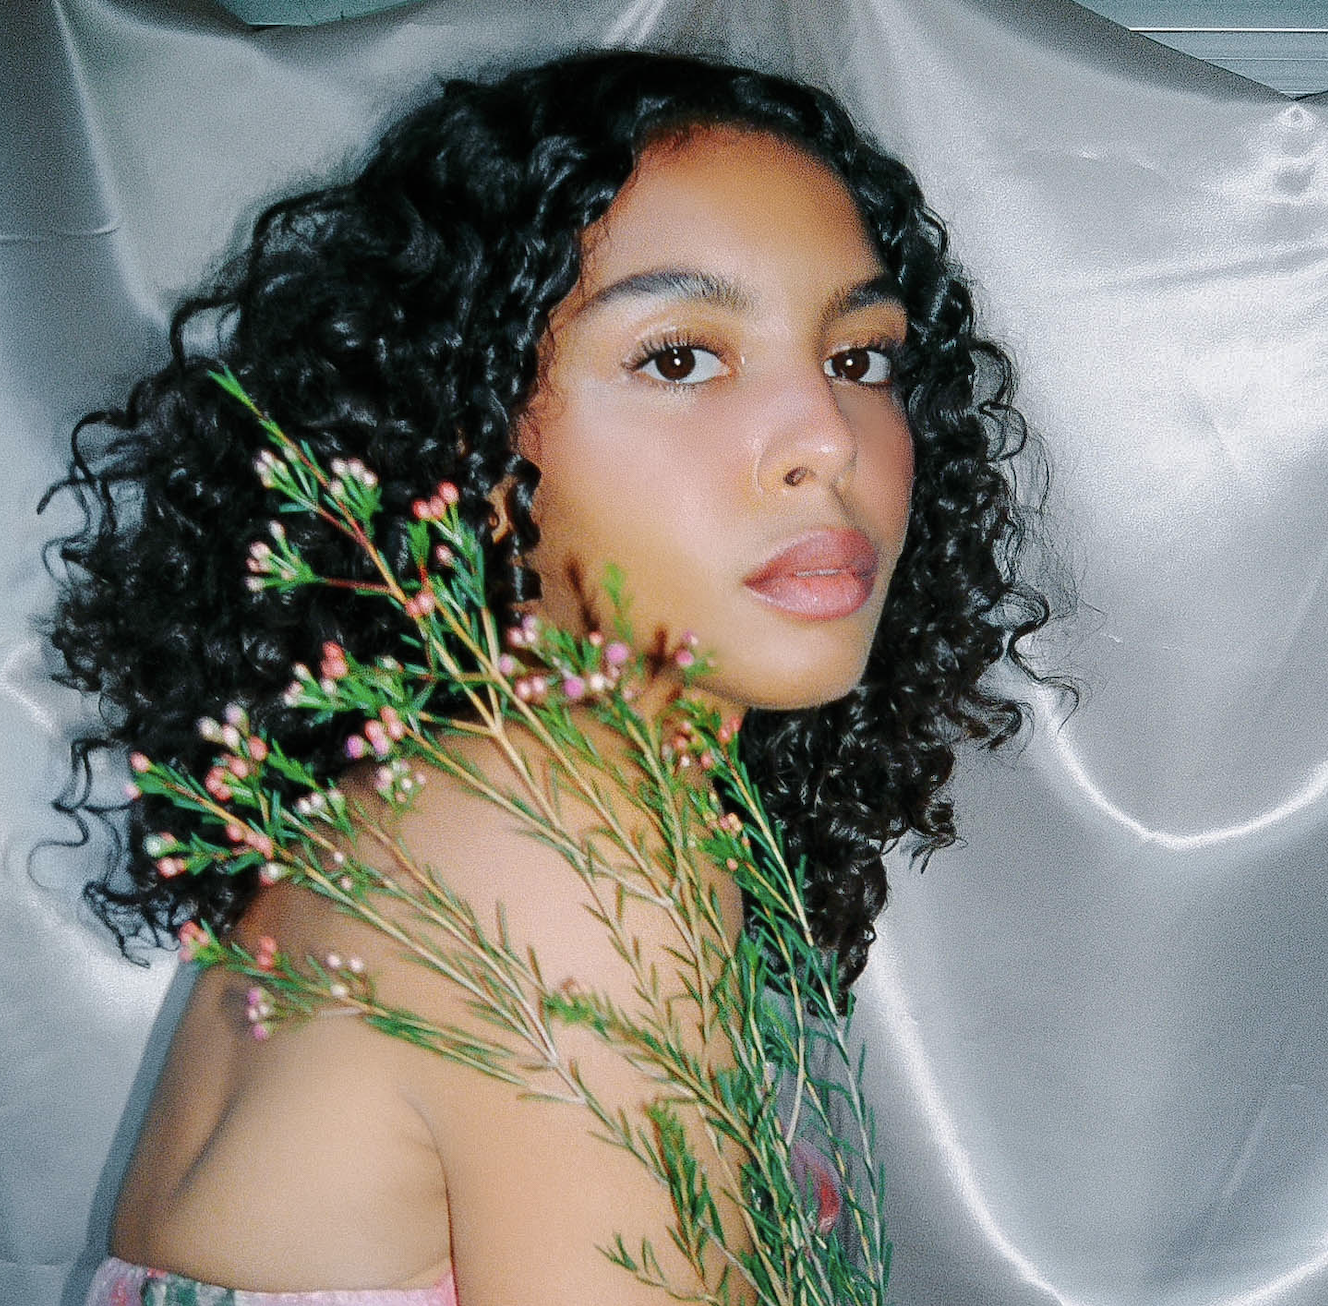 Arlissa Speaks On Her New Project, Her Partnership With Purple And Self-Care